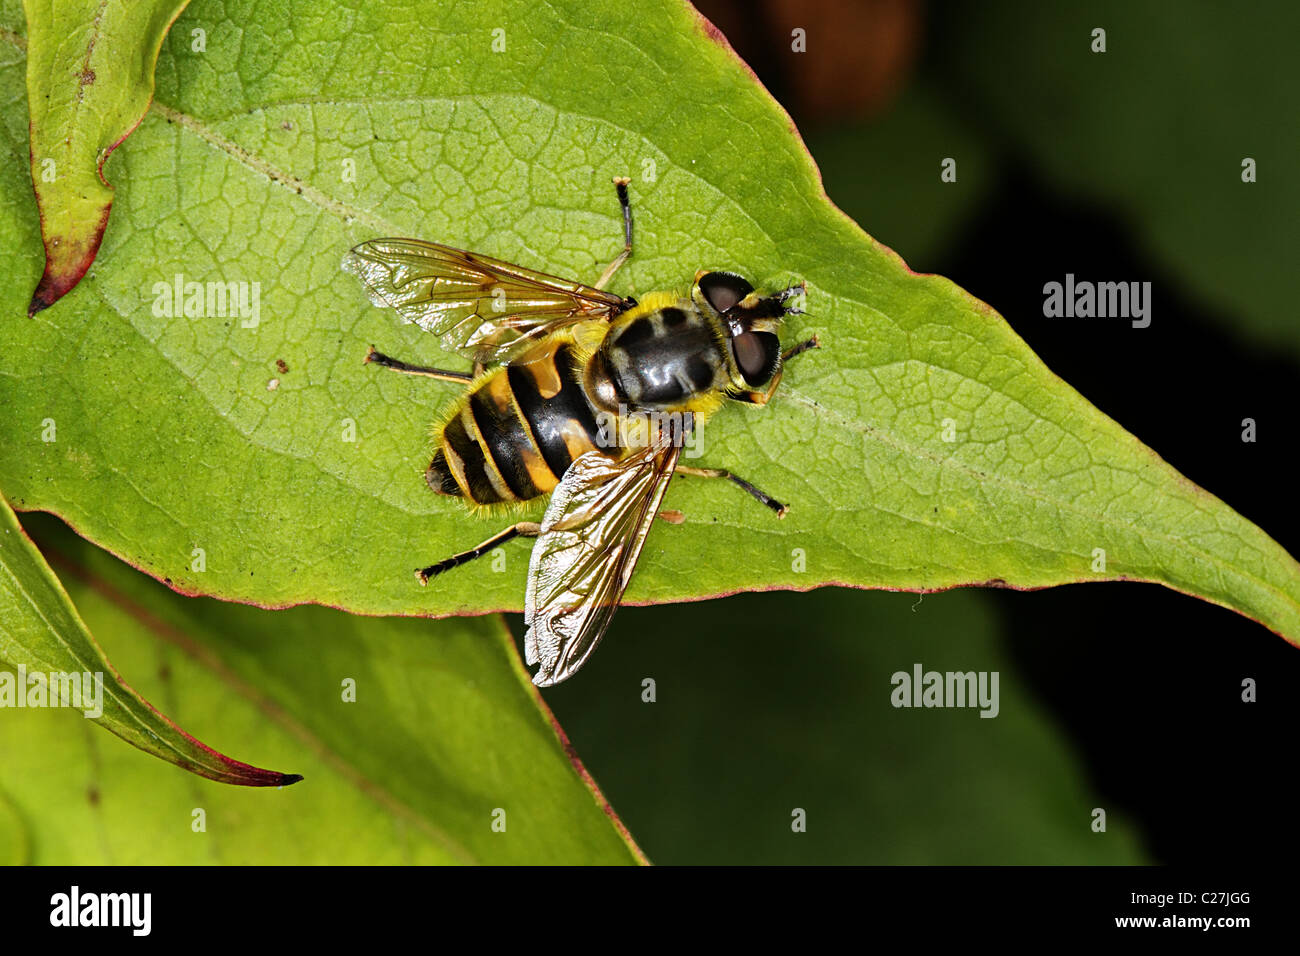 Myathrope florea hoverfly Banque D'Images